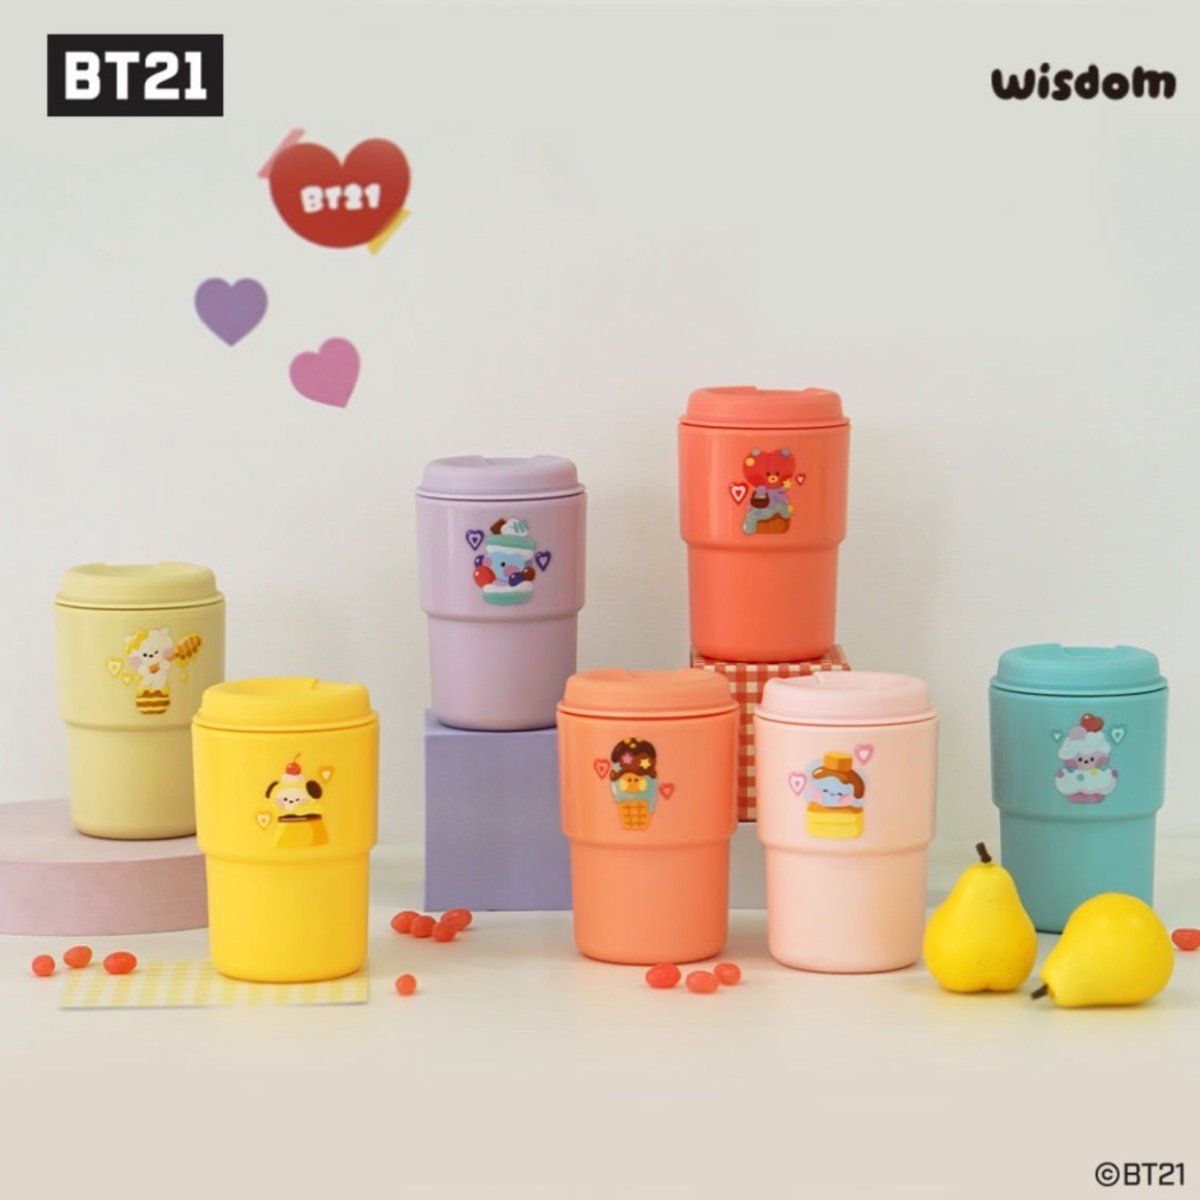 BT21 minini Large Insulated Can Tumbler - LINE FRIENDS_US